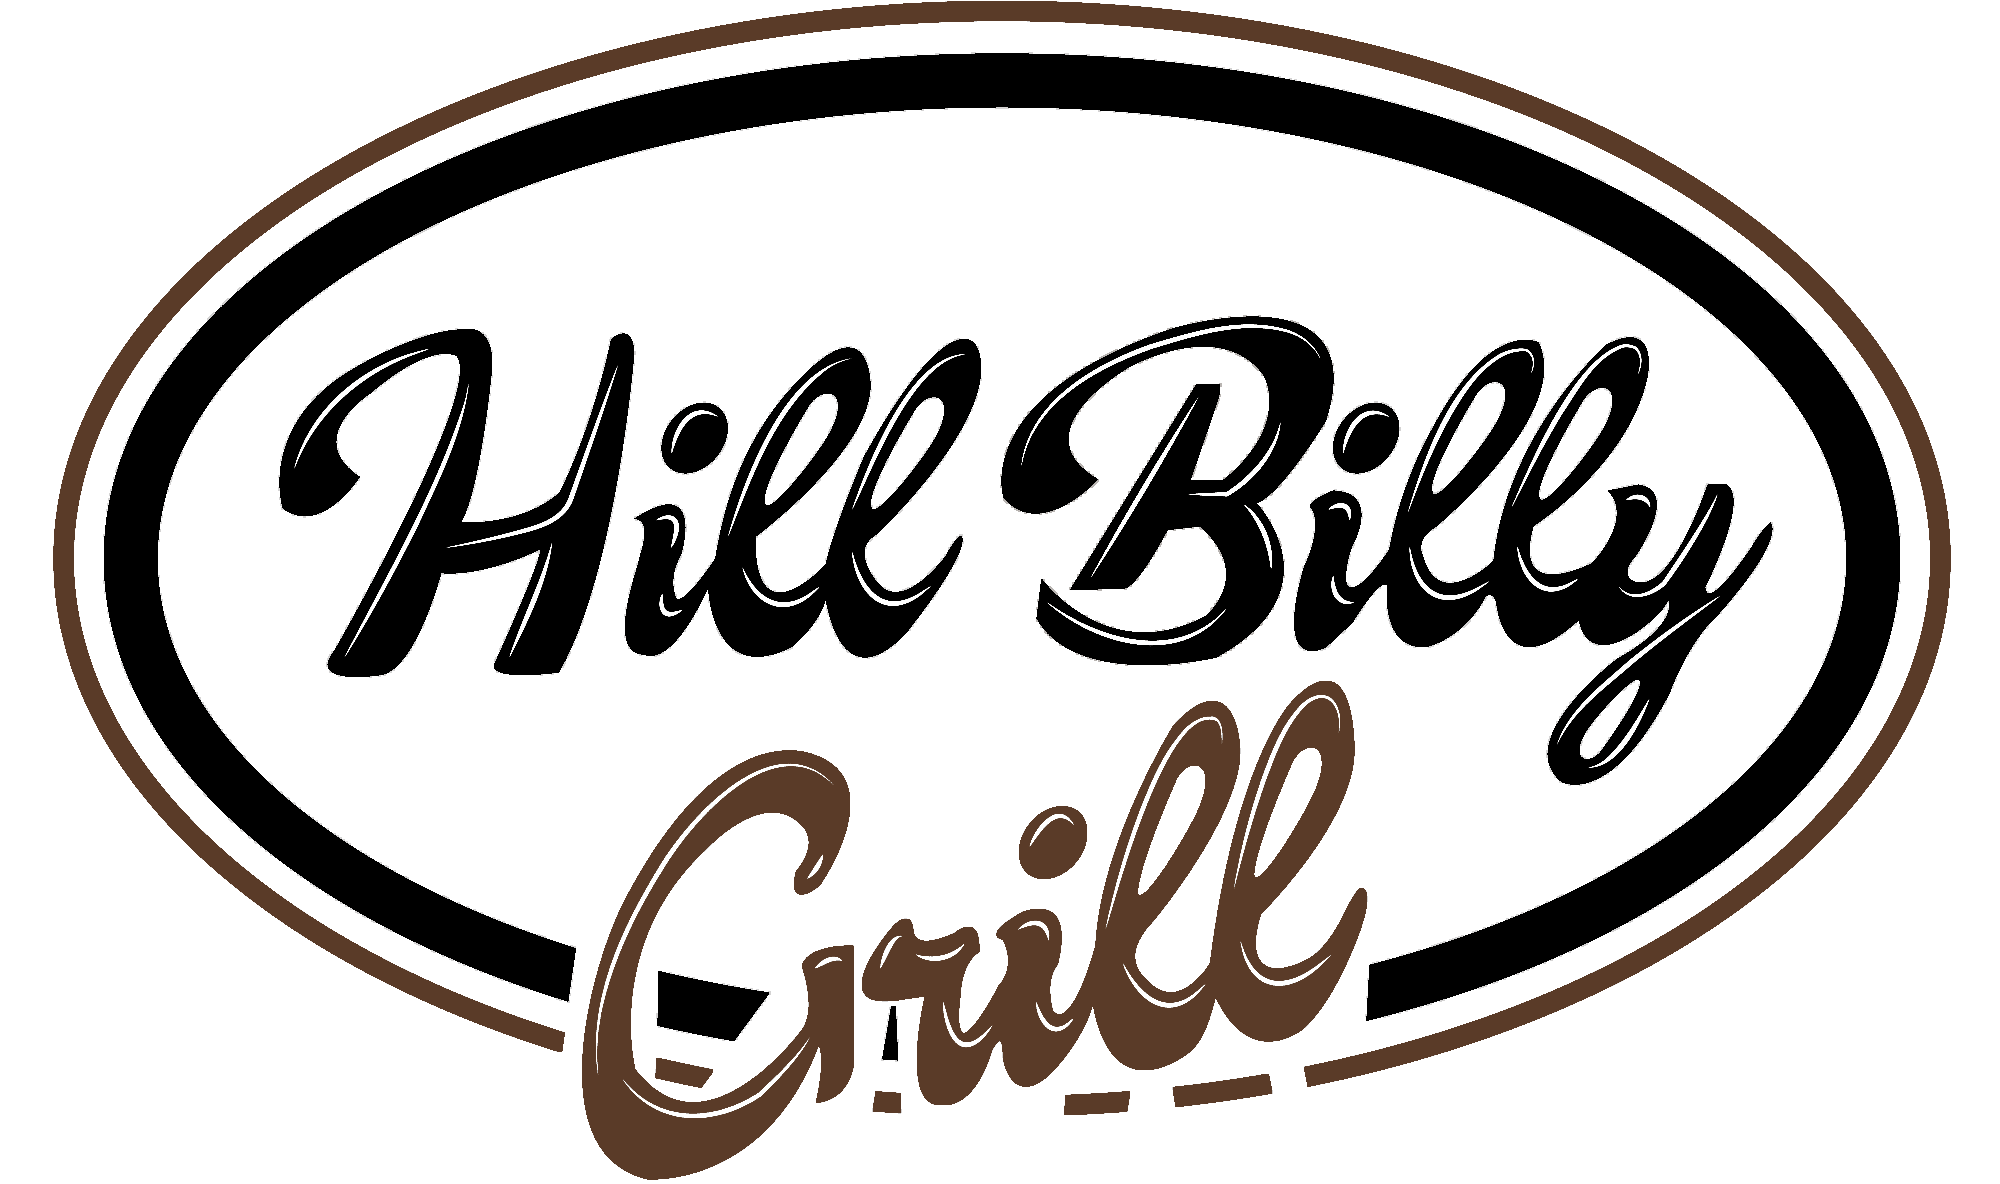 Hill Billy Grill